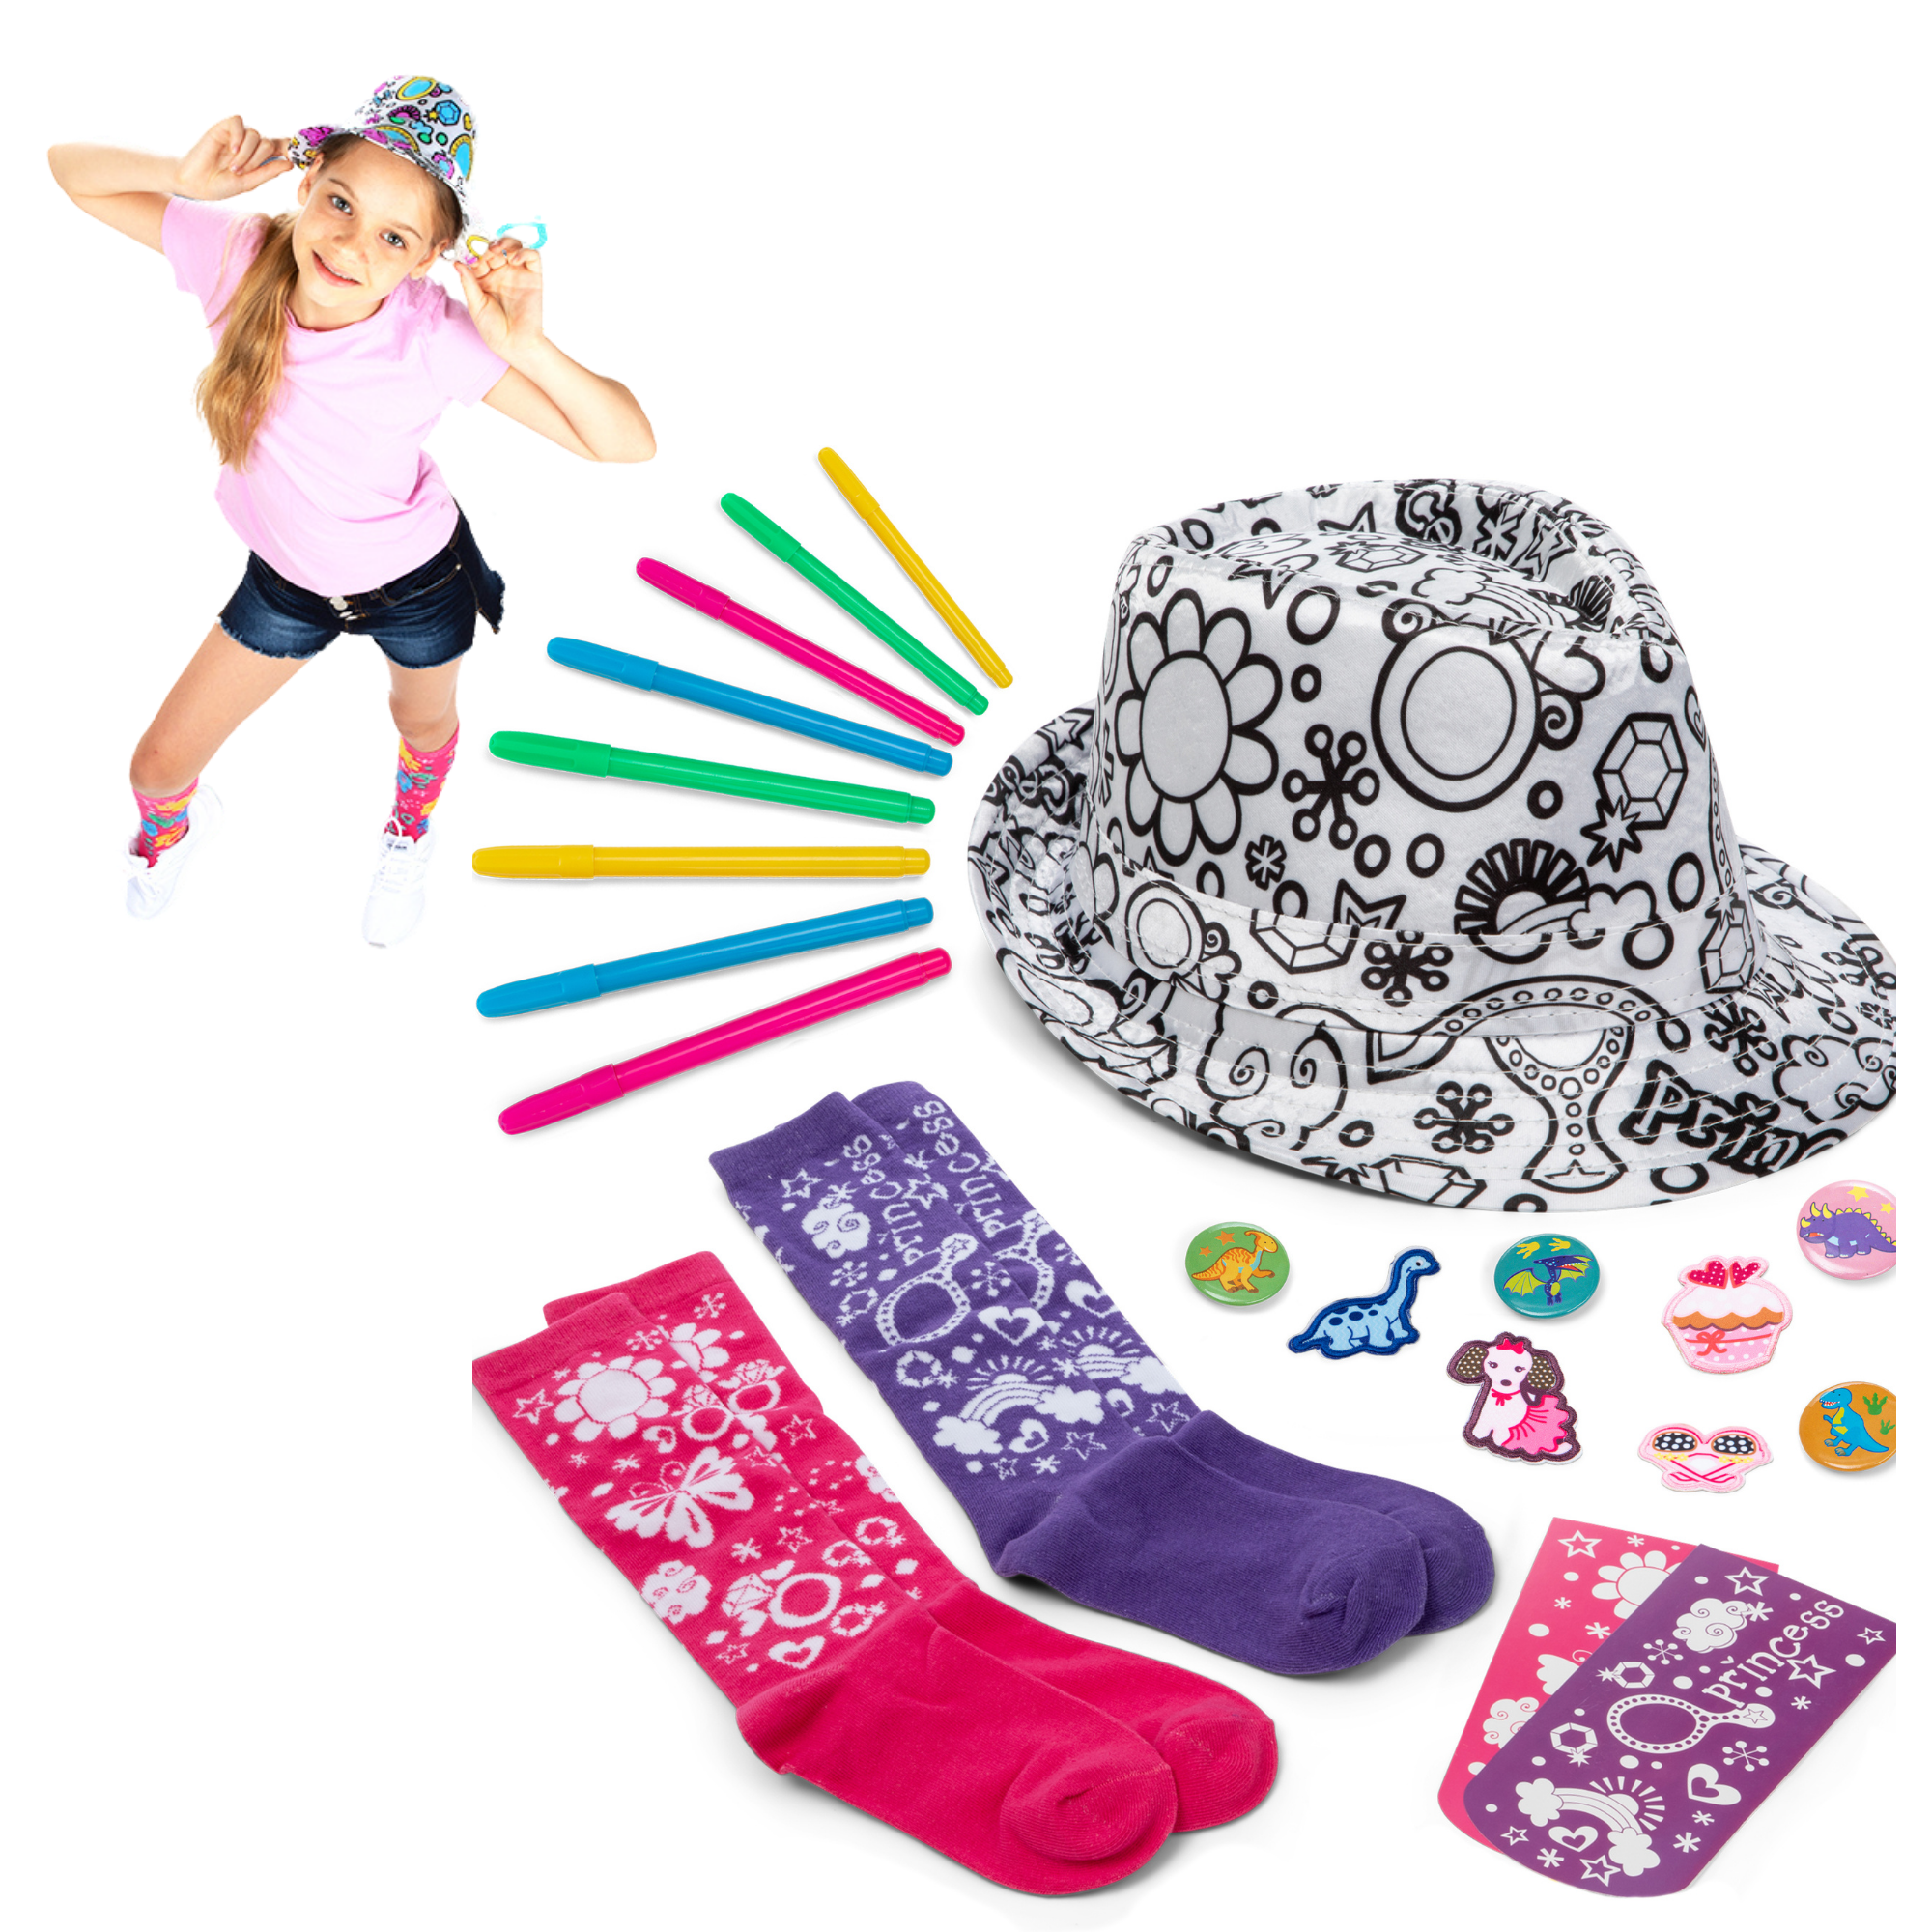 Color your own, PRINCESS Birthday Girls Fedora & Socks Gift,diy kid Craft Kits for girl ages